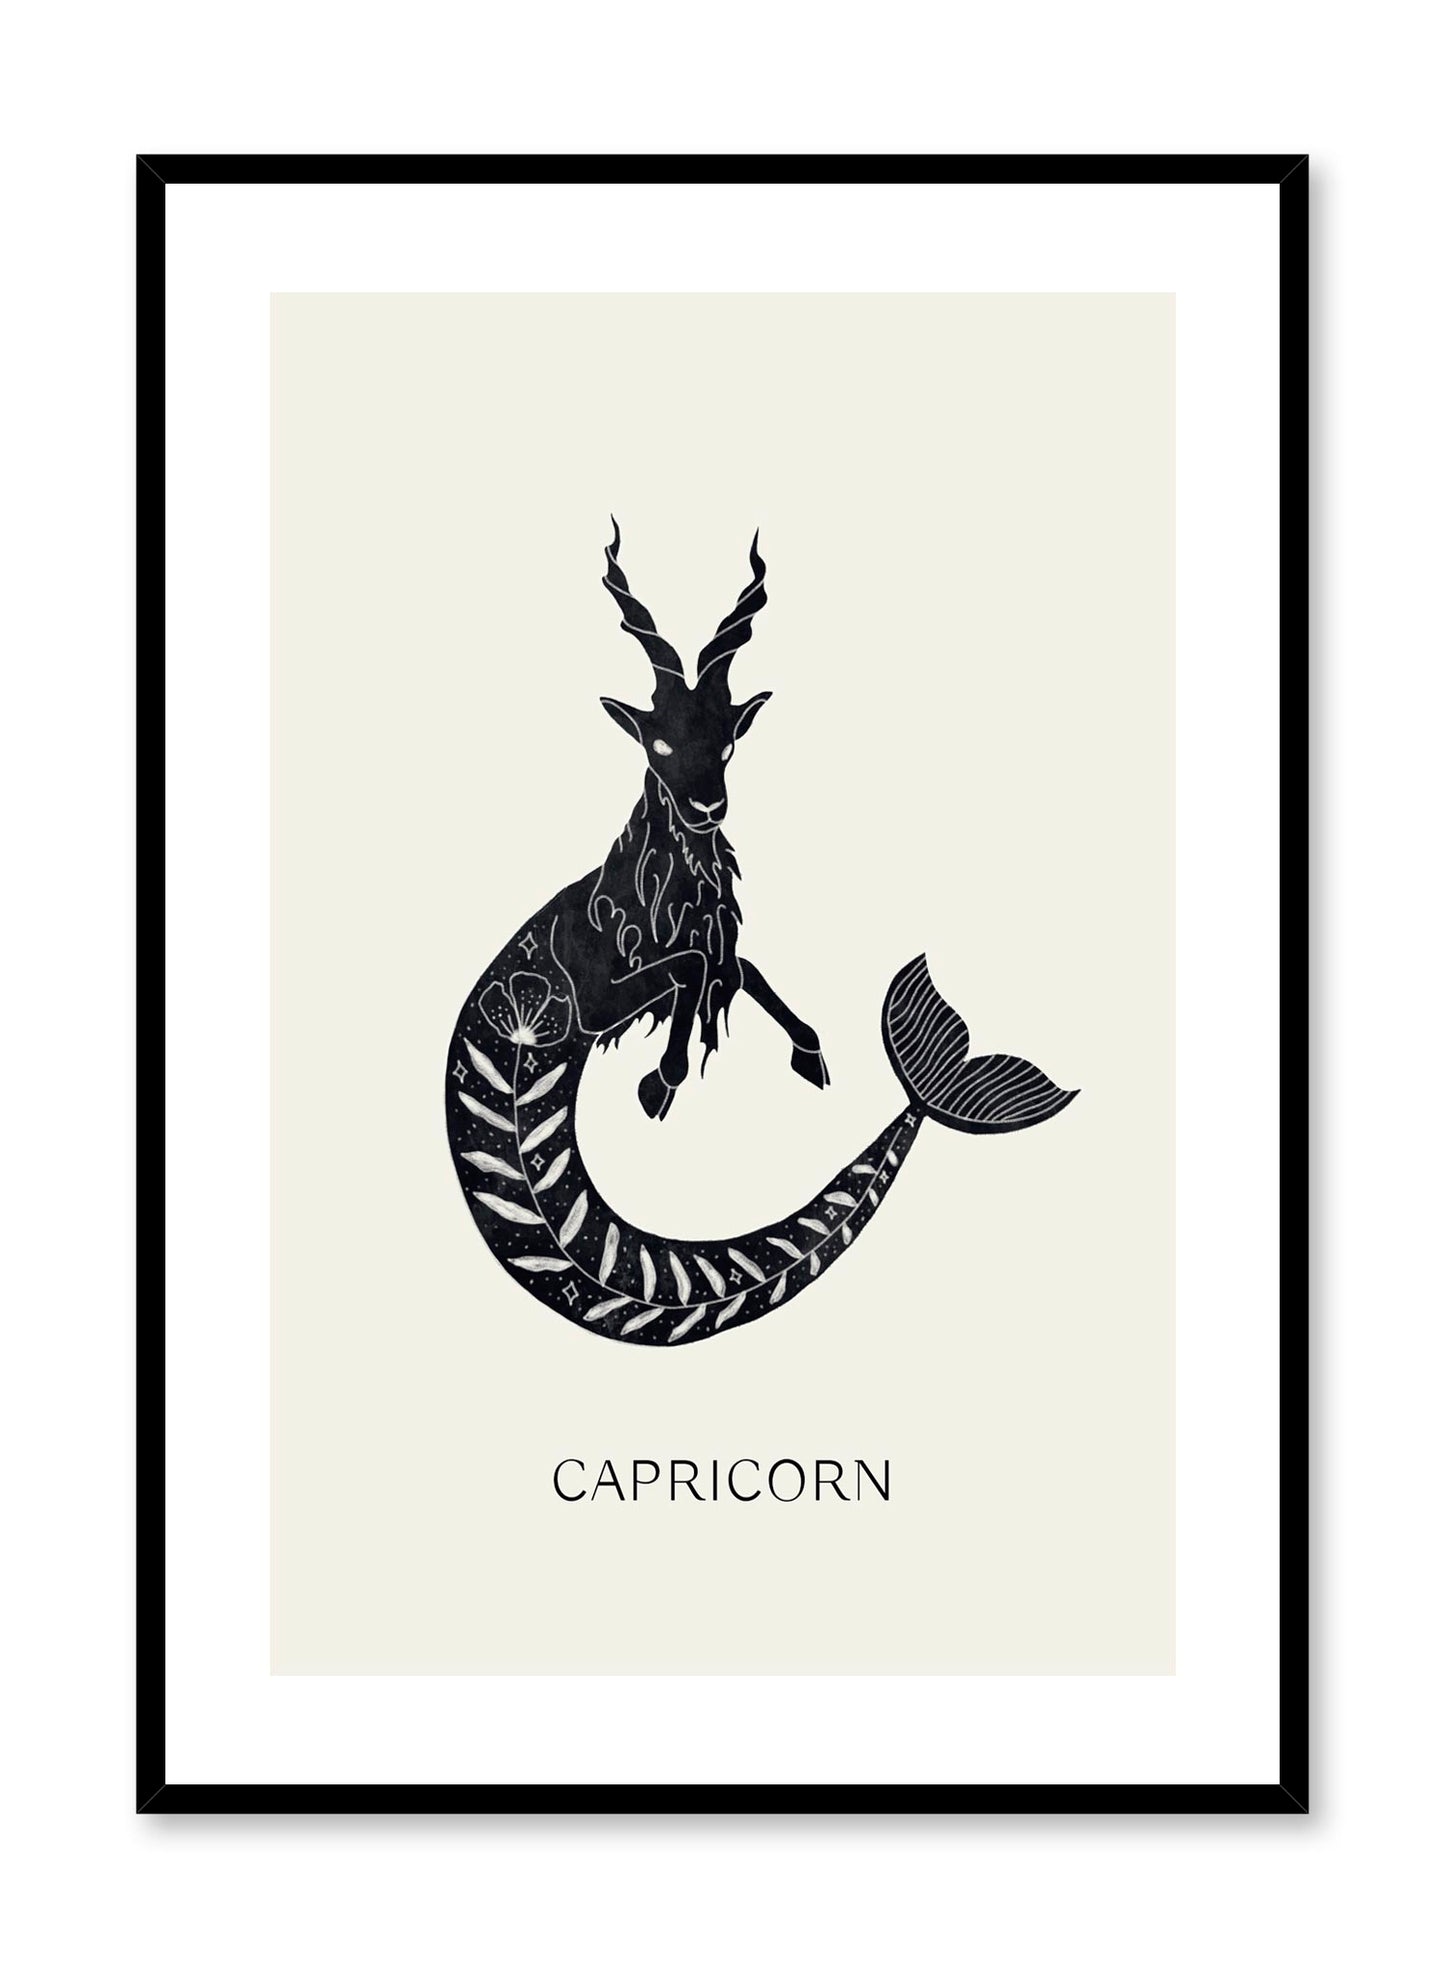 Celestial illustration poster by Opposite Wall with horoscope zodiac symbol of Capricorn